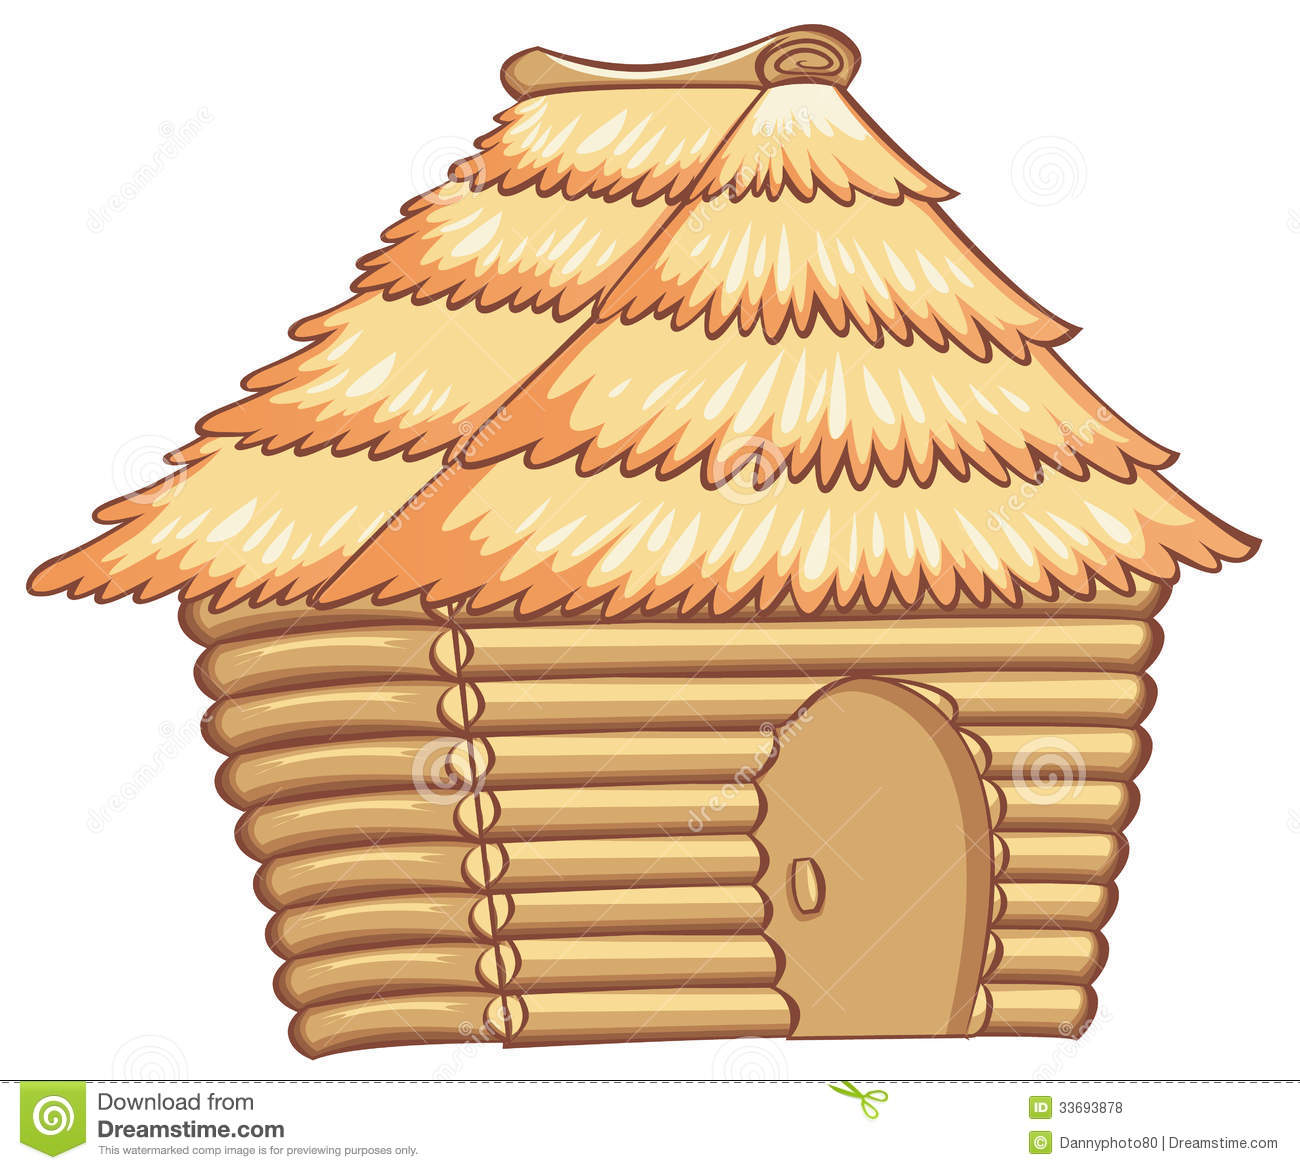 Indian hut clipart - Clipground